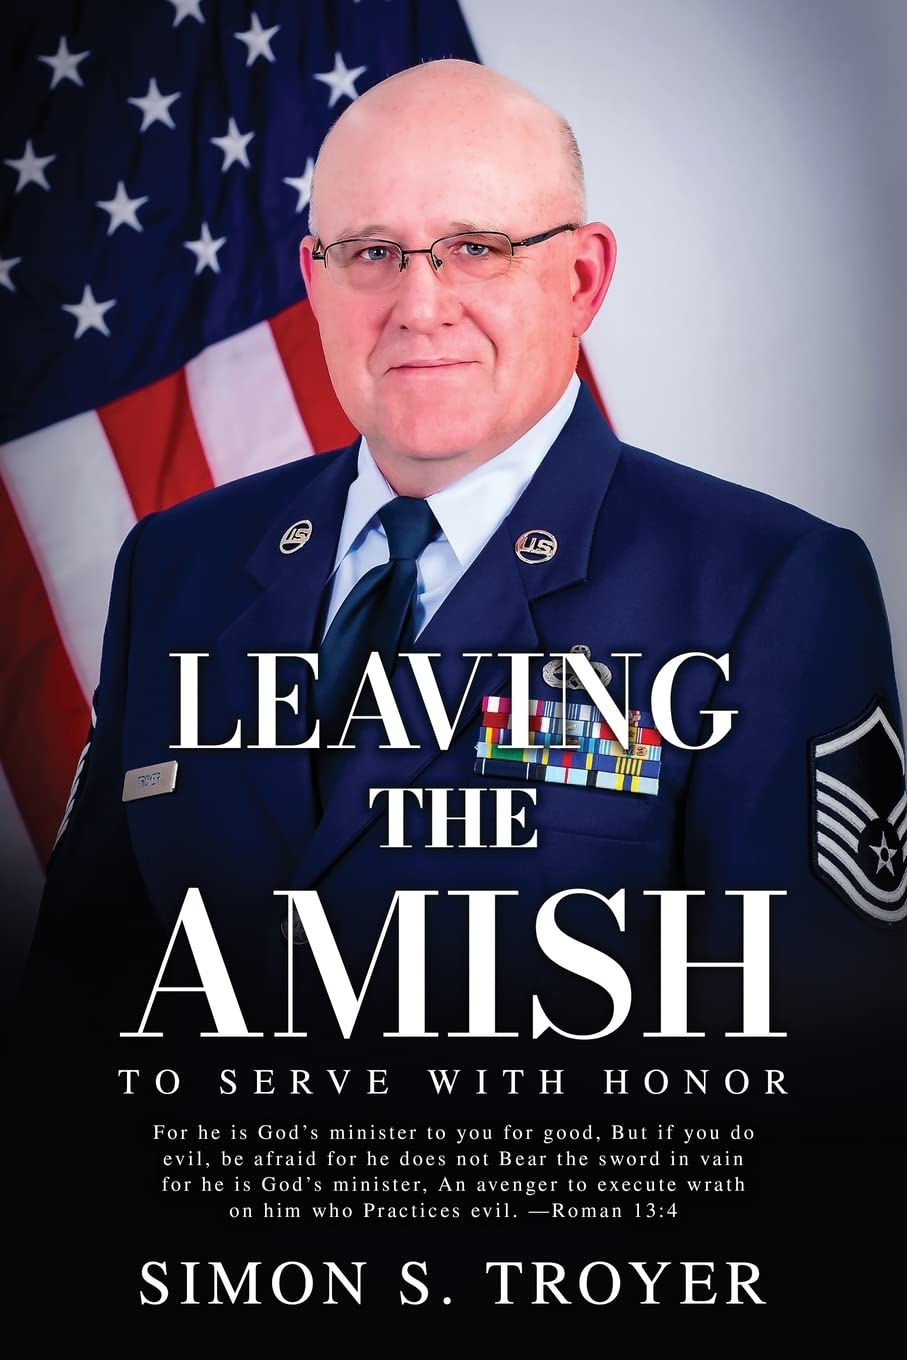 New book "Leaving the Amish" by Simon S. Troyer is released, an inspiring memoir of a man’s Amish origins, two decades of military service, and valuable life lessons learned along the way